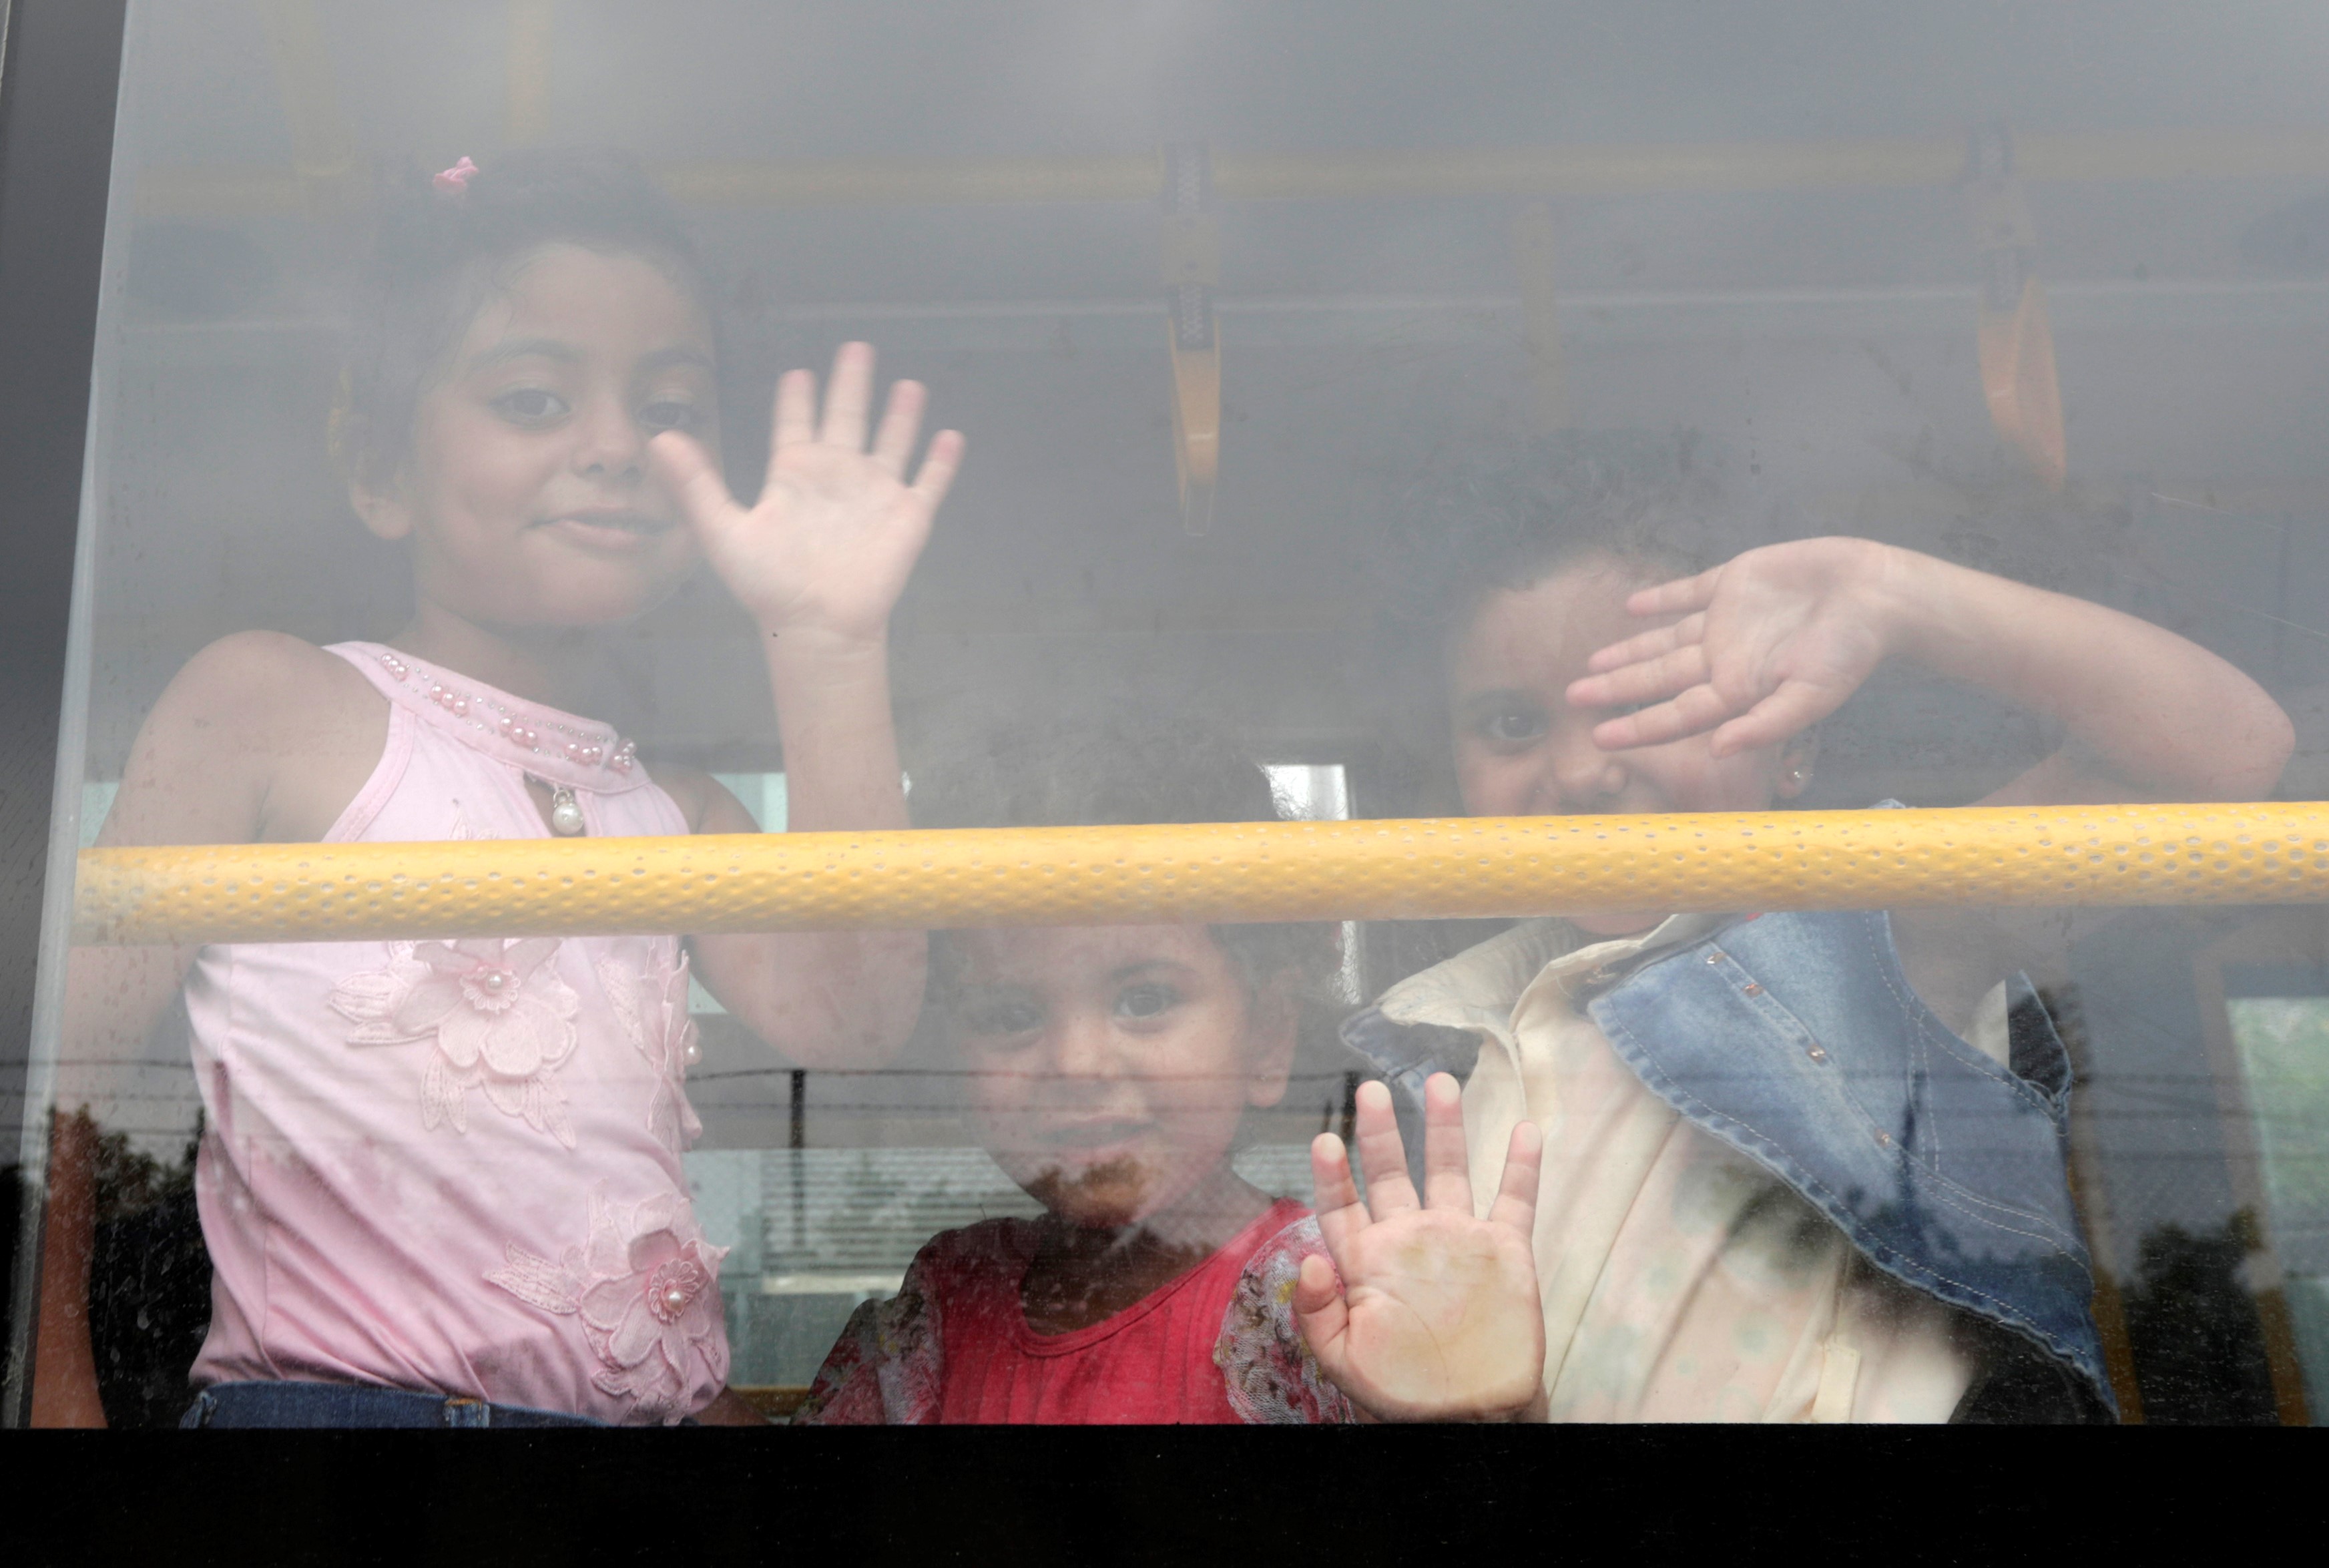 Syrian refugees wave from on board a bus in the Beirut suburb of Burj Hammoud, north of the capital on 29 August (AFP)